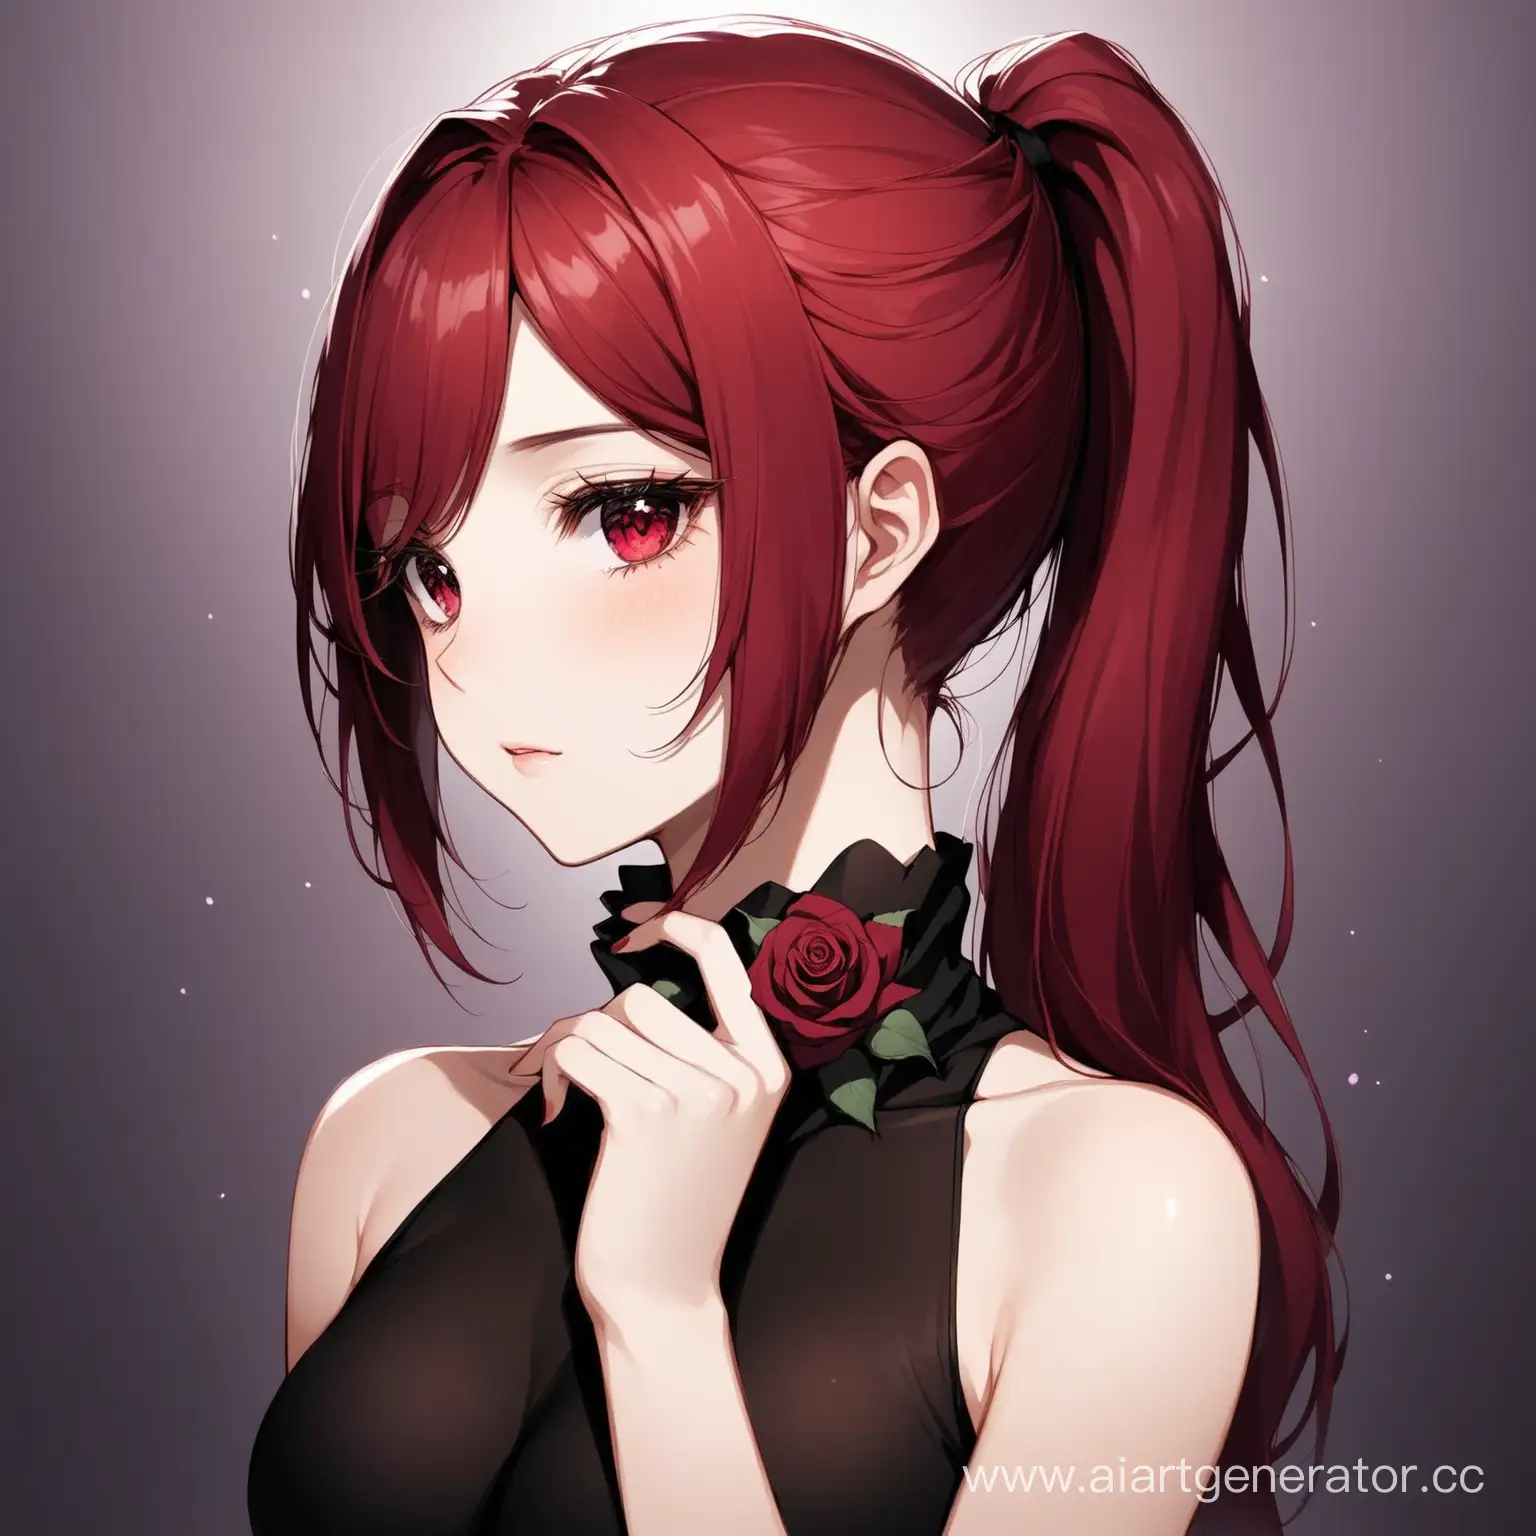 The girl with the red as rose hair in a ponytail. Her eyes are a dark purple color. There is a flower in her hair. The girl is wearing a tight black badlon covering her neck, sleeveless. The skin is a light shade 